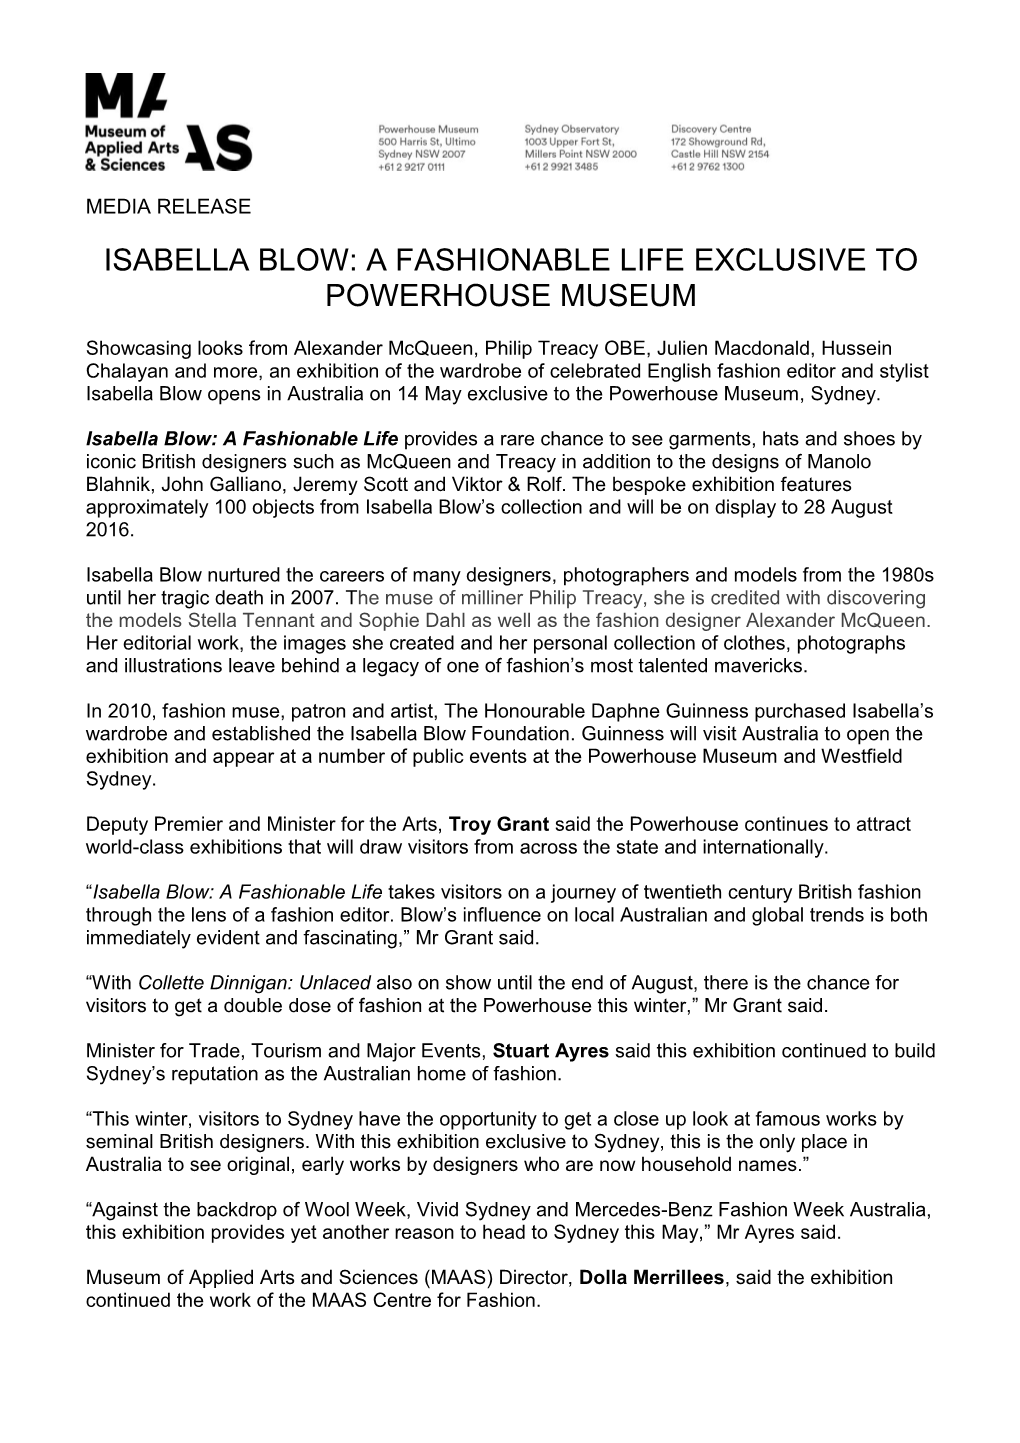 Isabella Blow: a Fashionable Life Exclusive to Powerhouse Museum